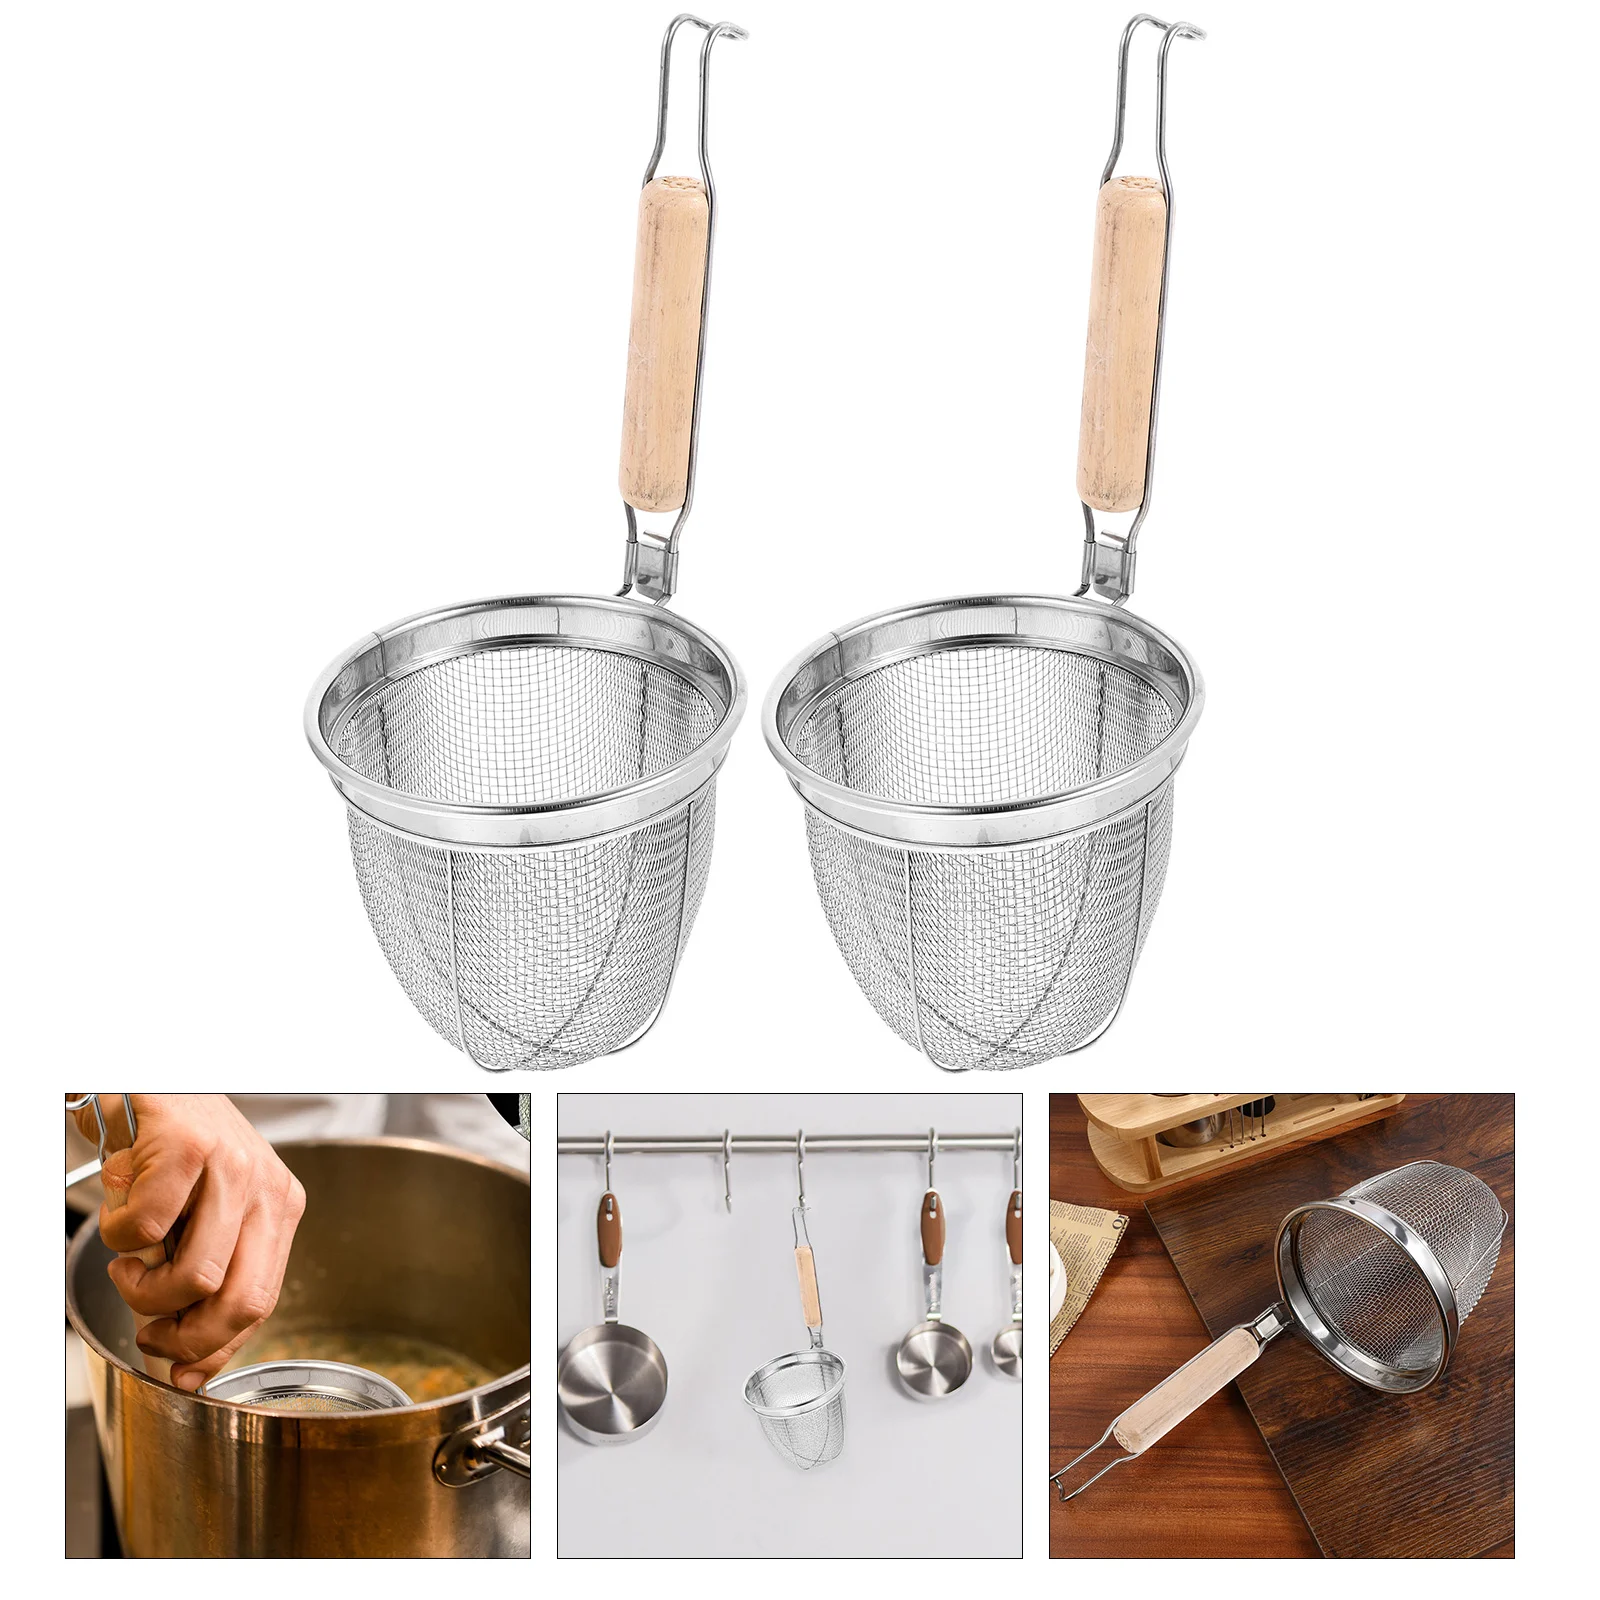 

2pcs Fine Mesh Strainers Stainless Steel Skimmer Spoon Skimmer Ladle Strainer Basket for Kitchen Frying Pasta Spaghetti Noodle